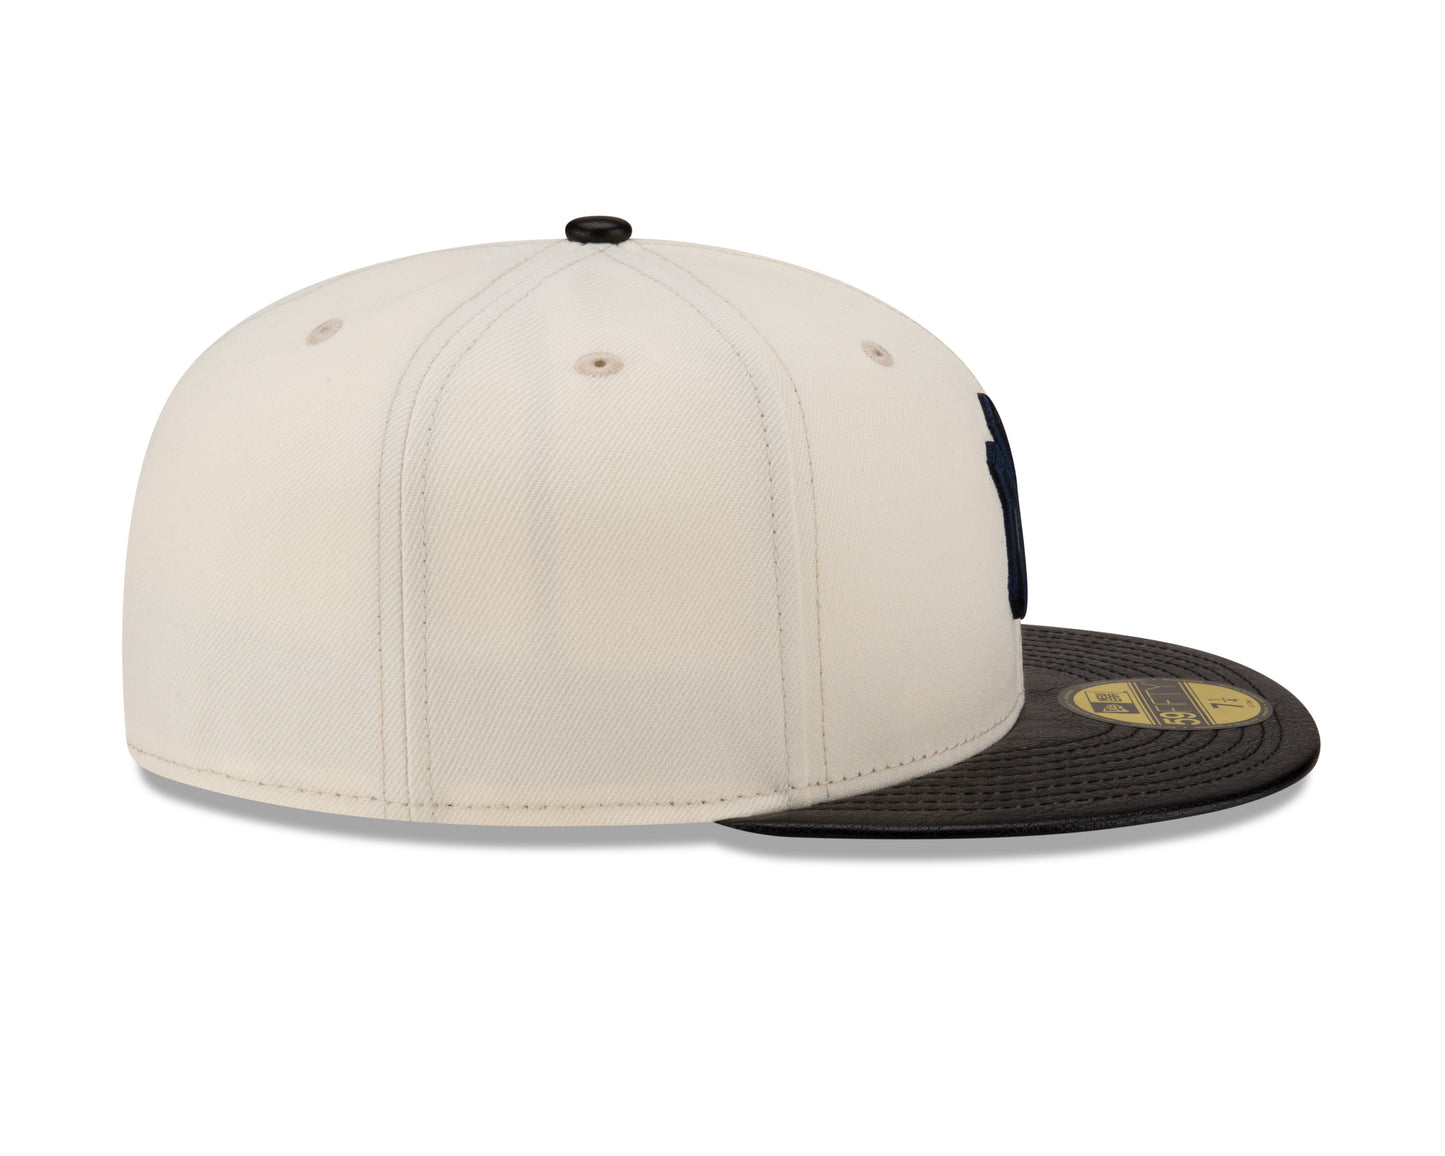 New York Yankees Cream/Black Leather Visor New Era 59FIFTY Fitted Hat